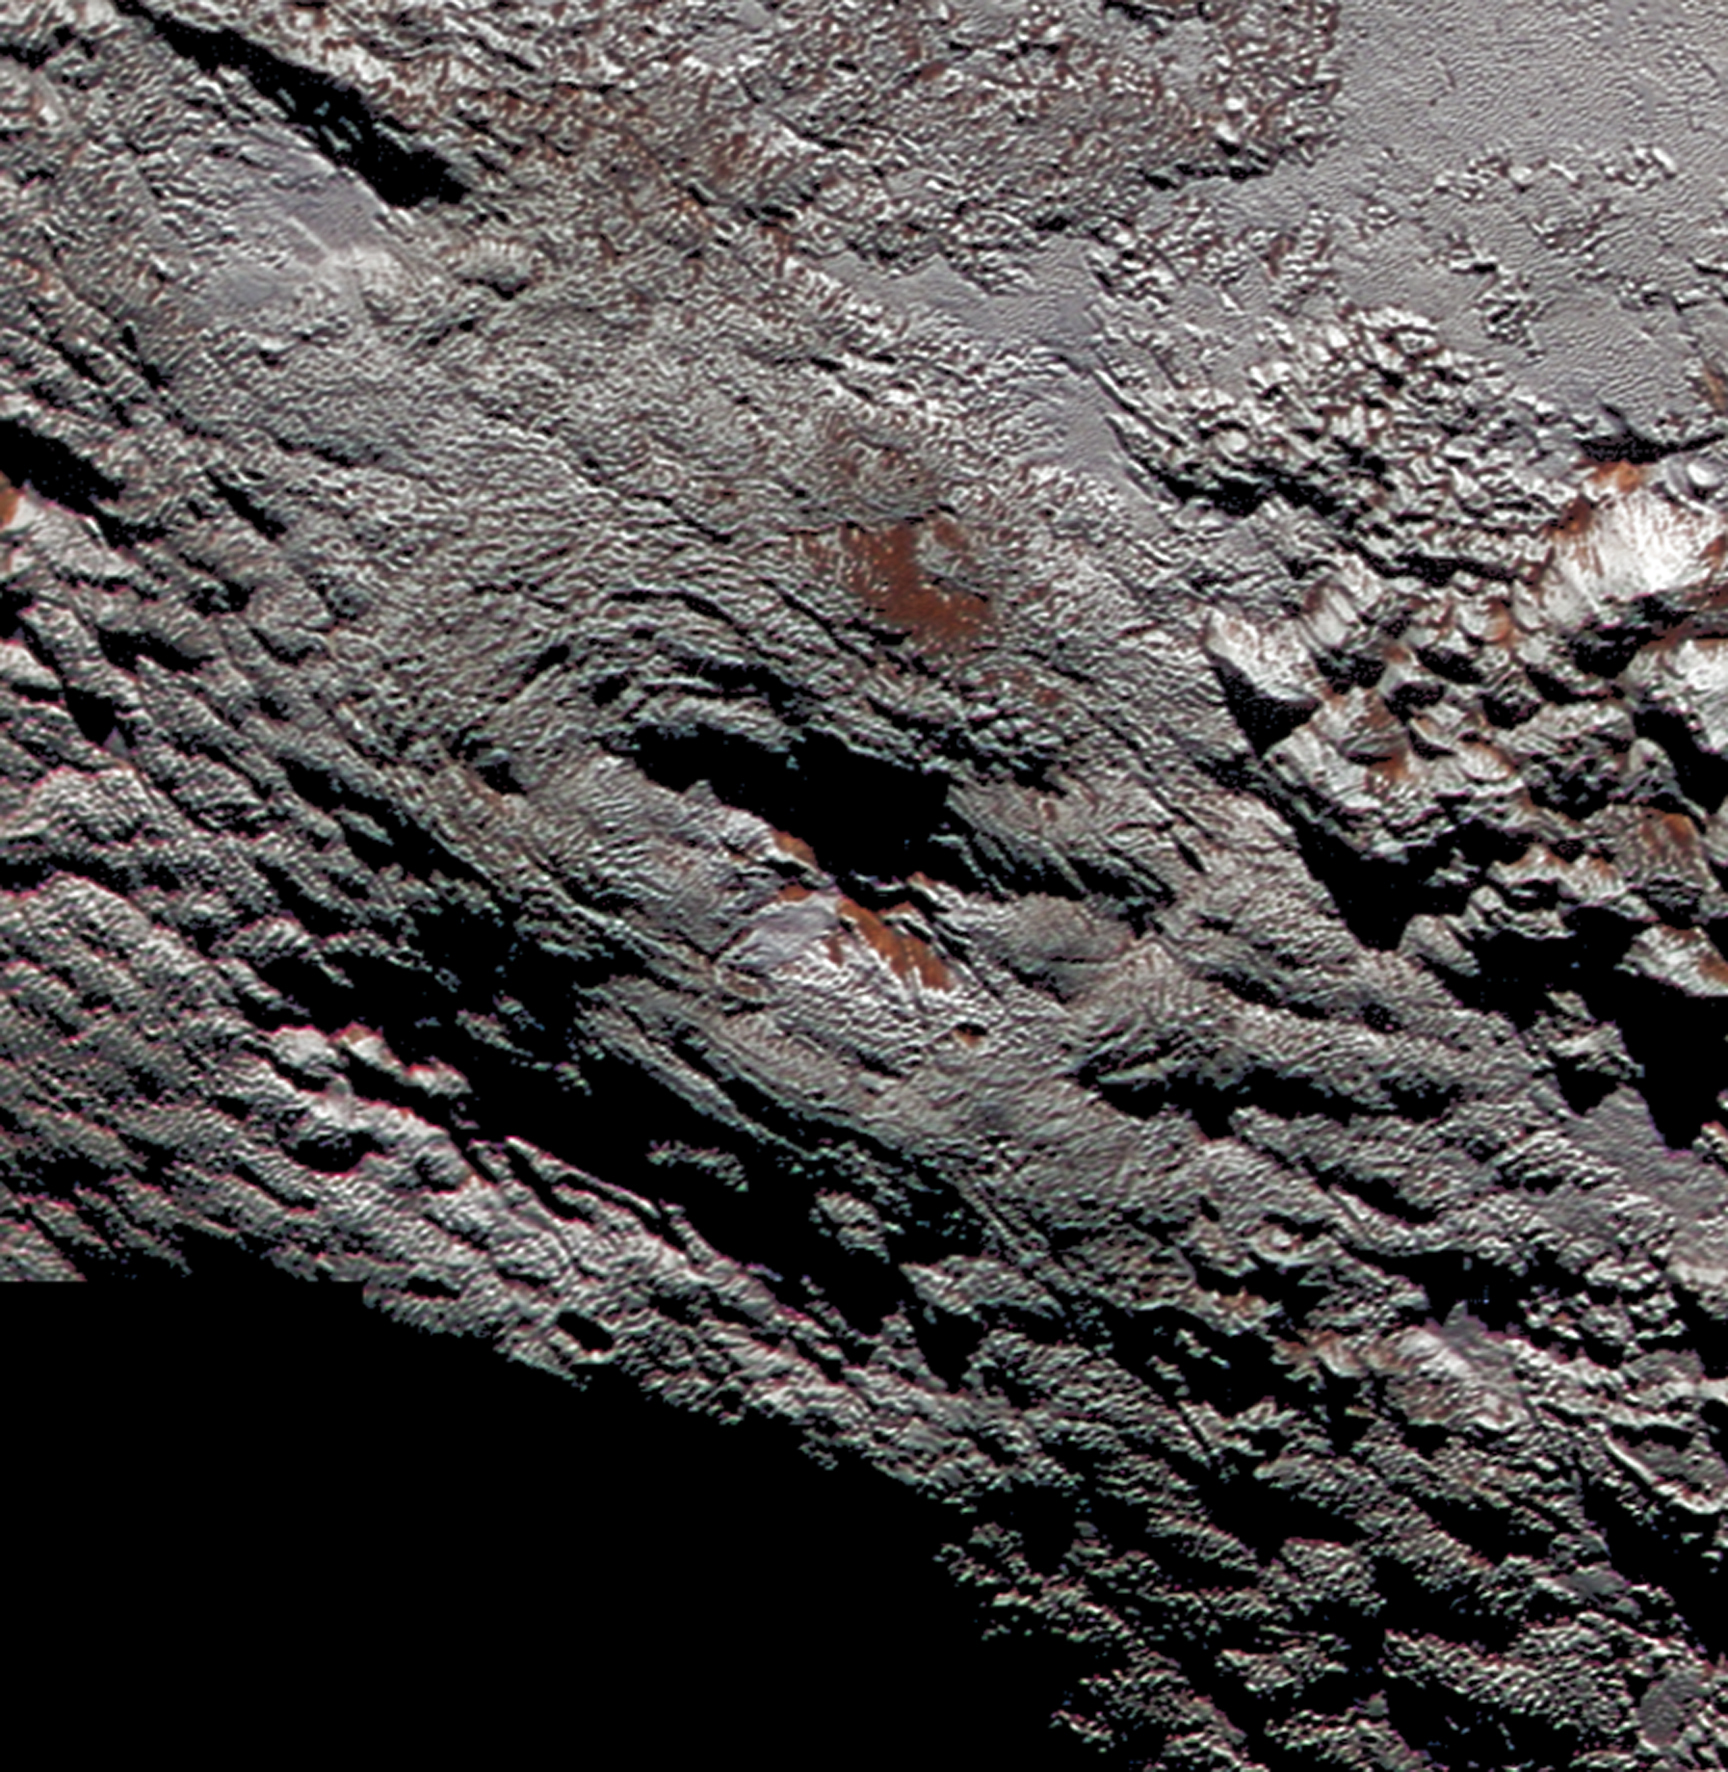 Figure 14: This rounded mountain, named Wright Mons, has what appears to be a summit crater. It is one of two candidates for evidence of possible recent cryovolcanism seen on Pluto by New Horizons. Credit: NASA/JHUAPL/SwRI